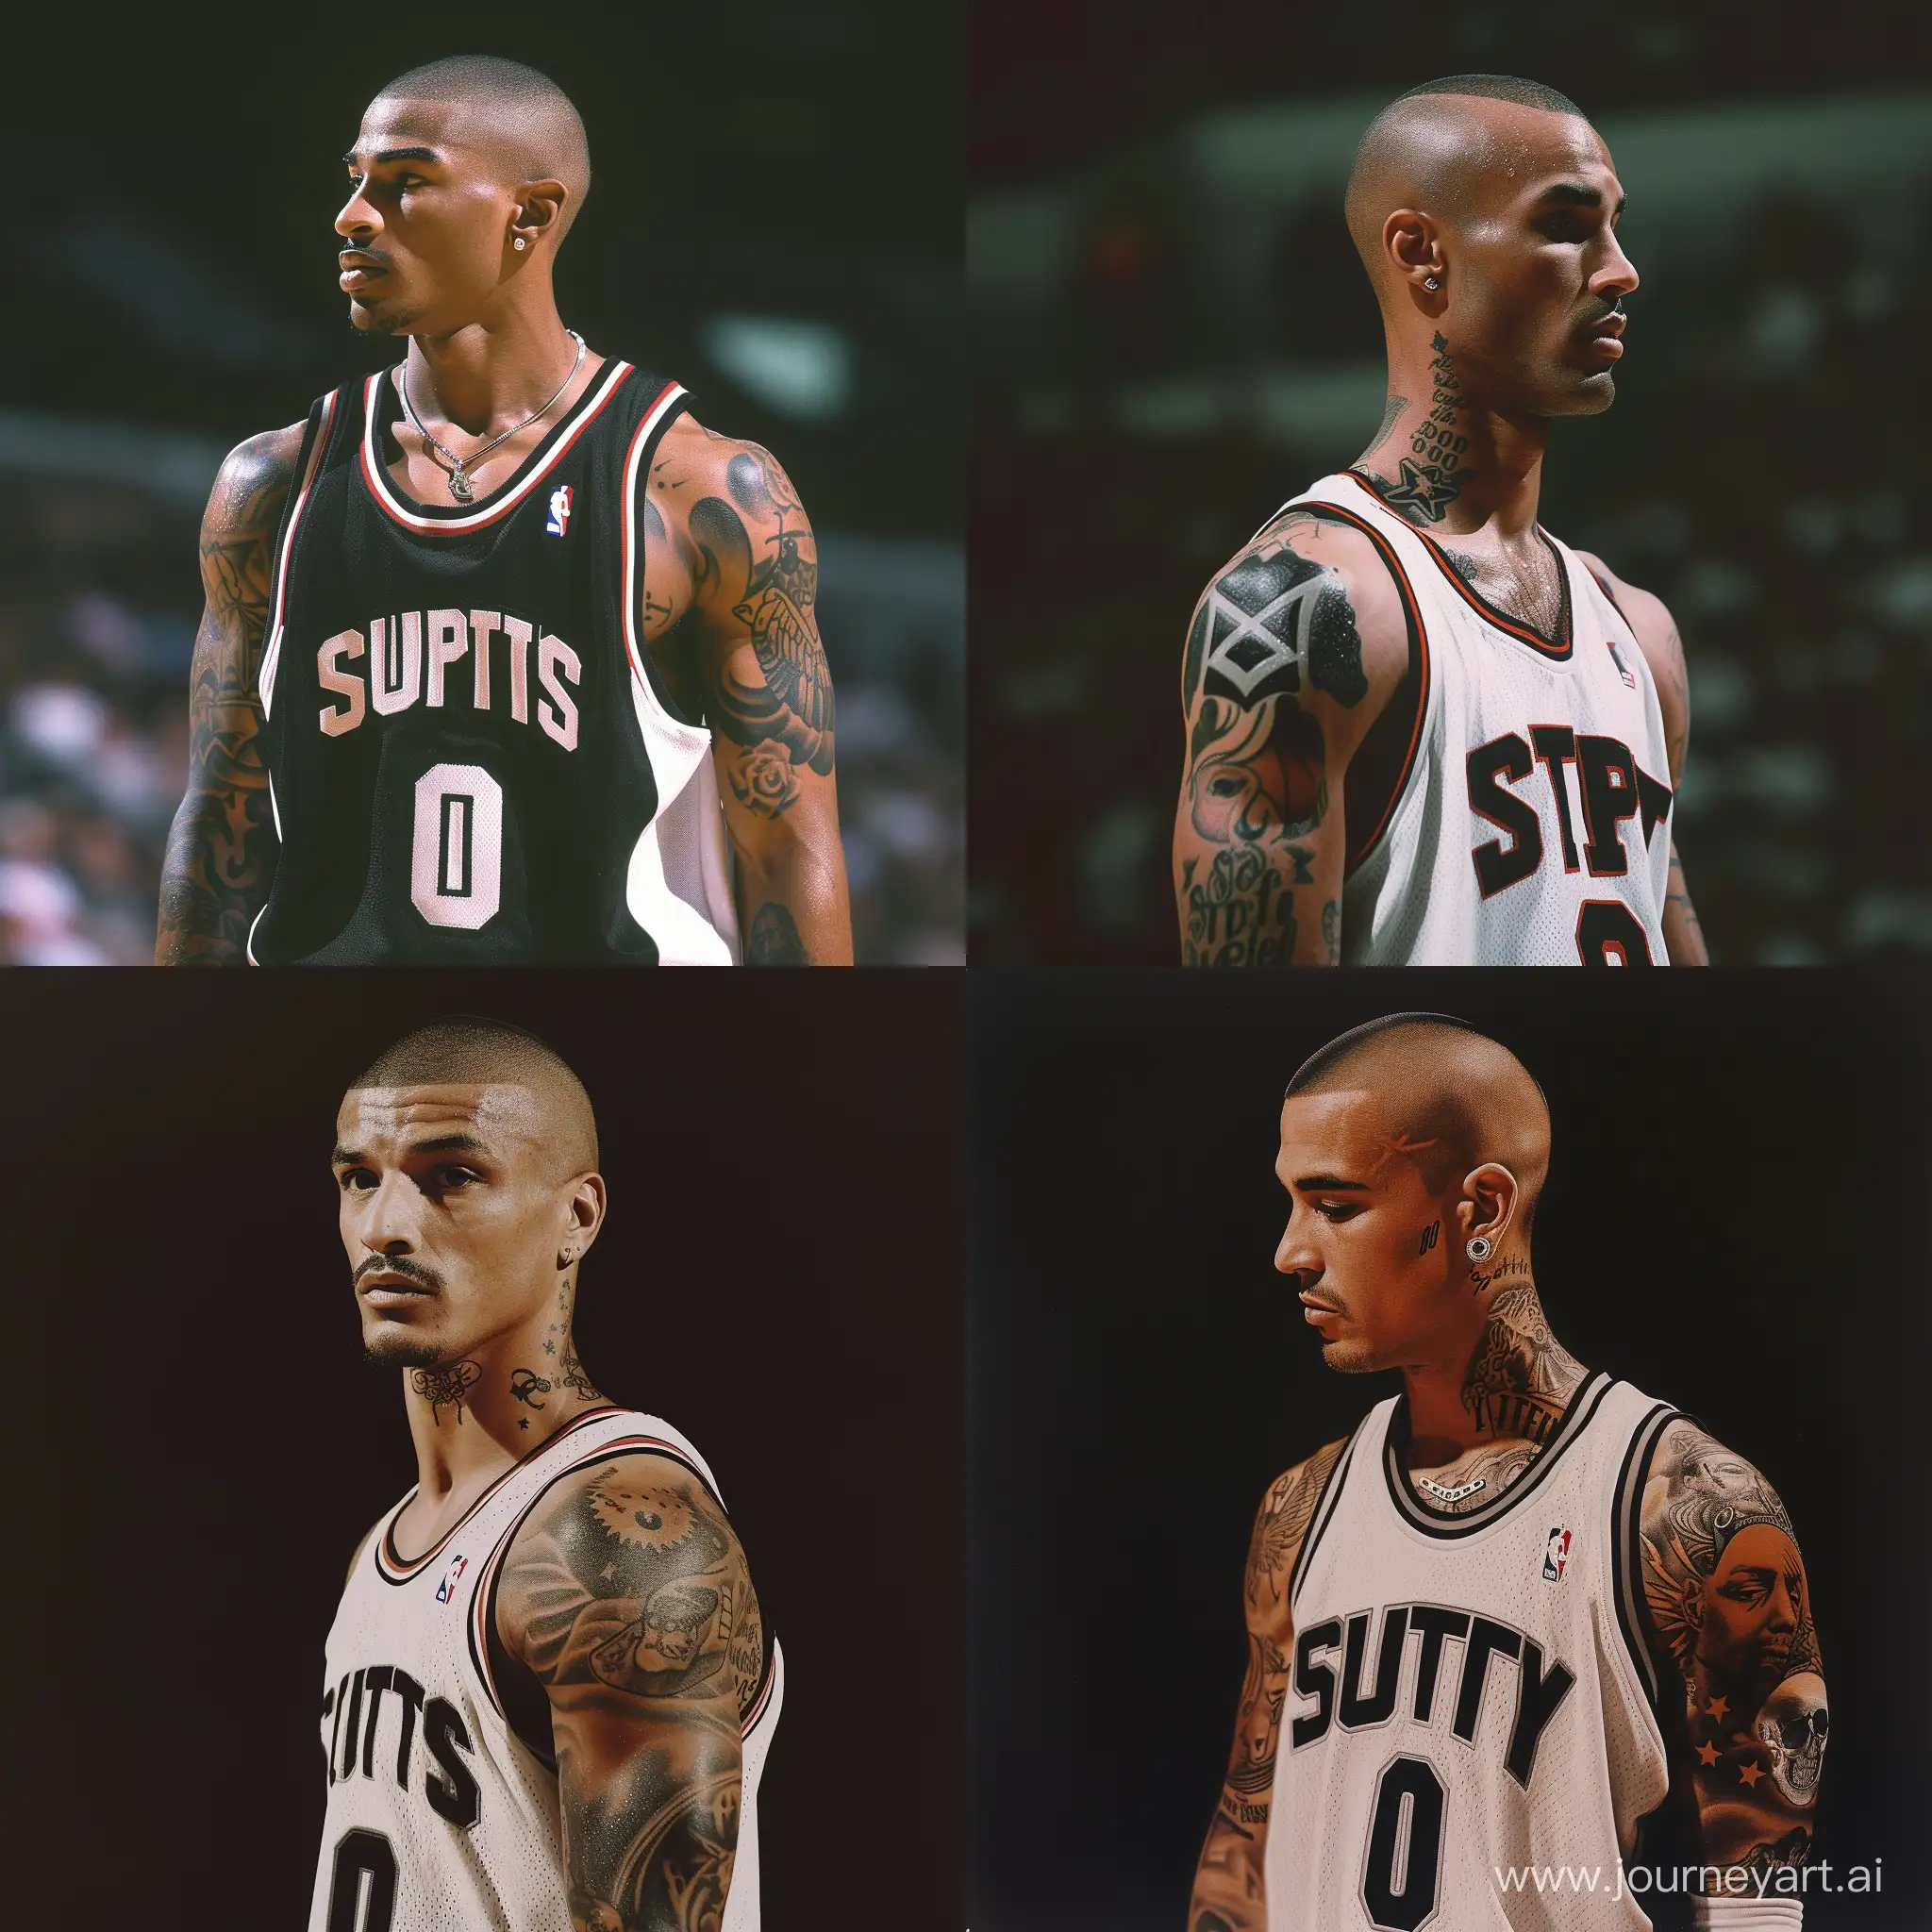 A late 1990s photograph of a Michael Jordan look alike with a buzz cut and tattoos,Wearing a Spurs Jersey,Wearing Number 0